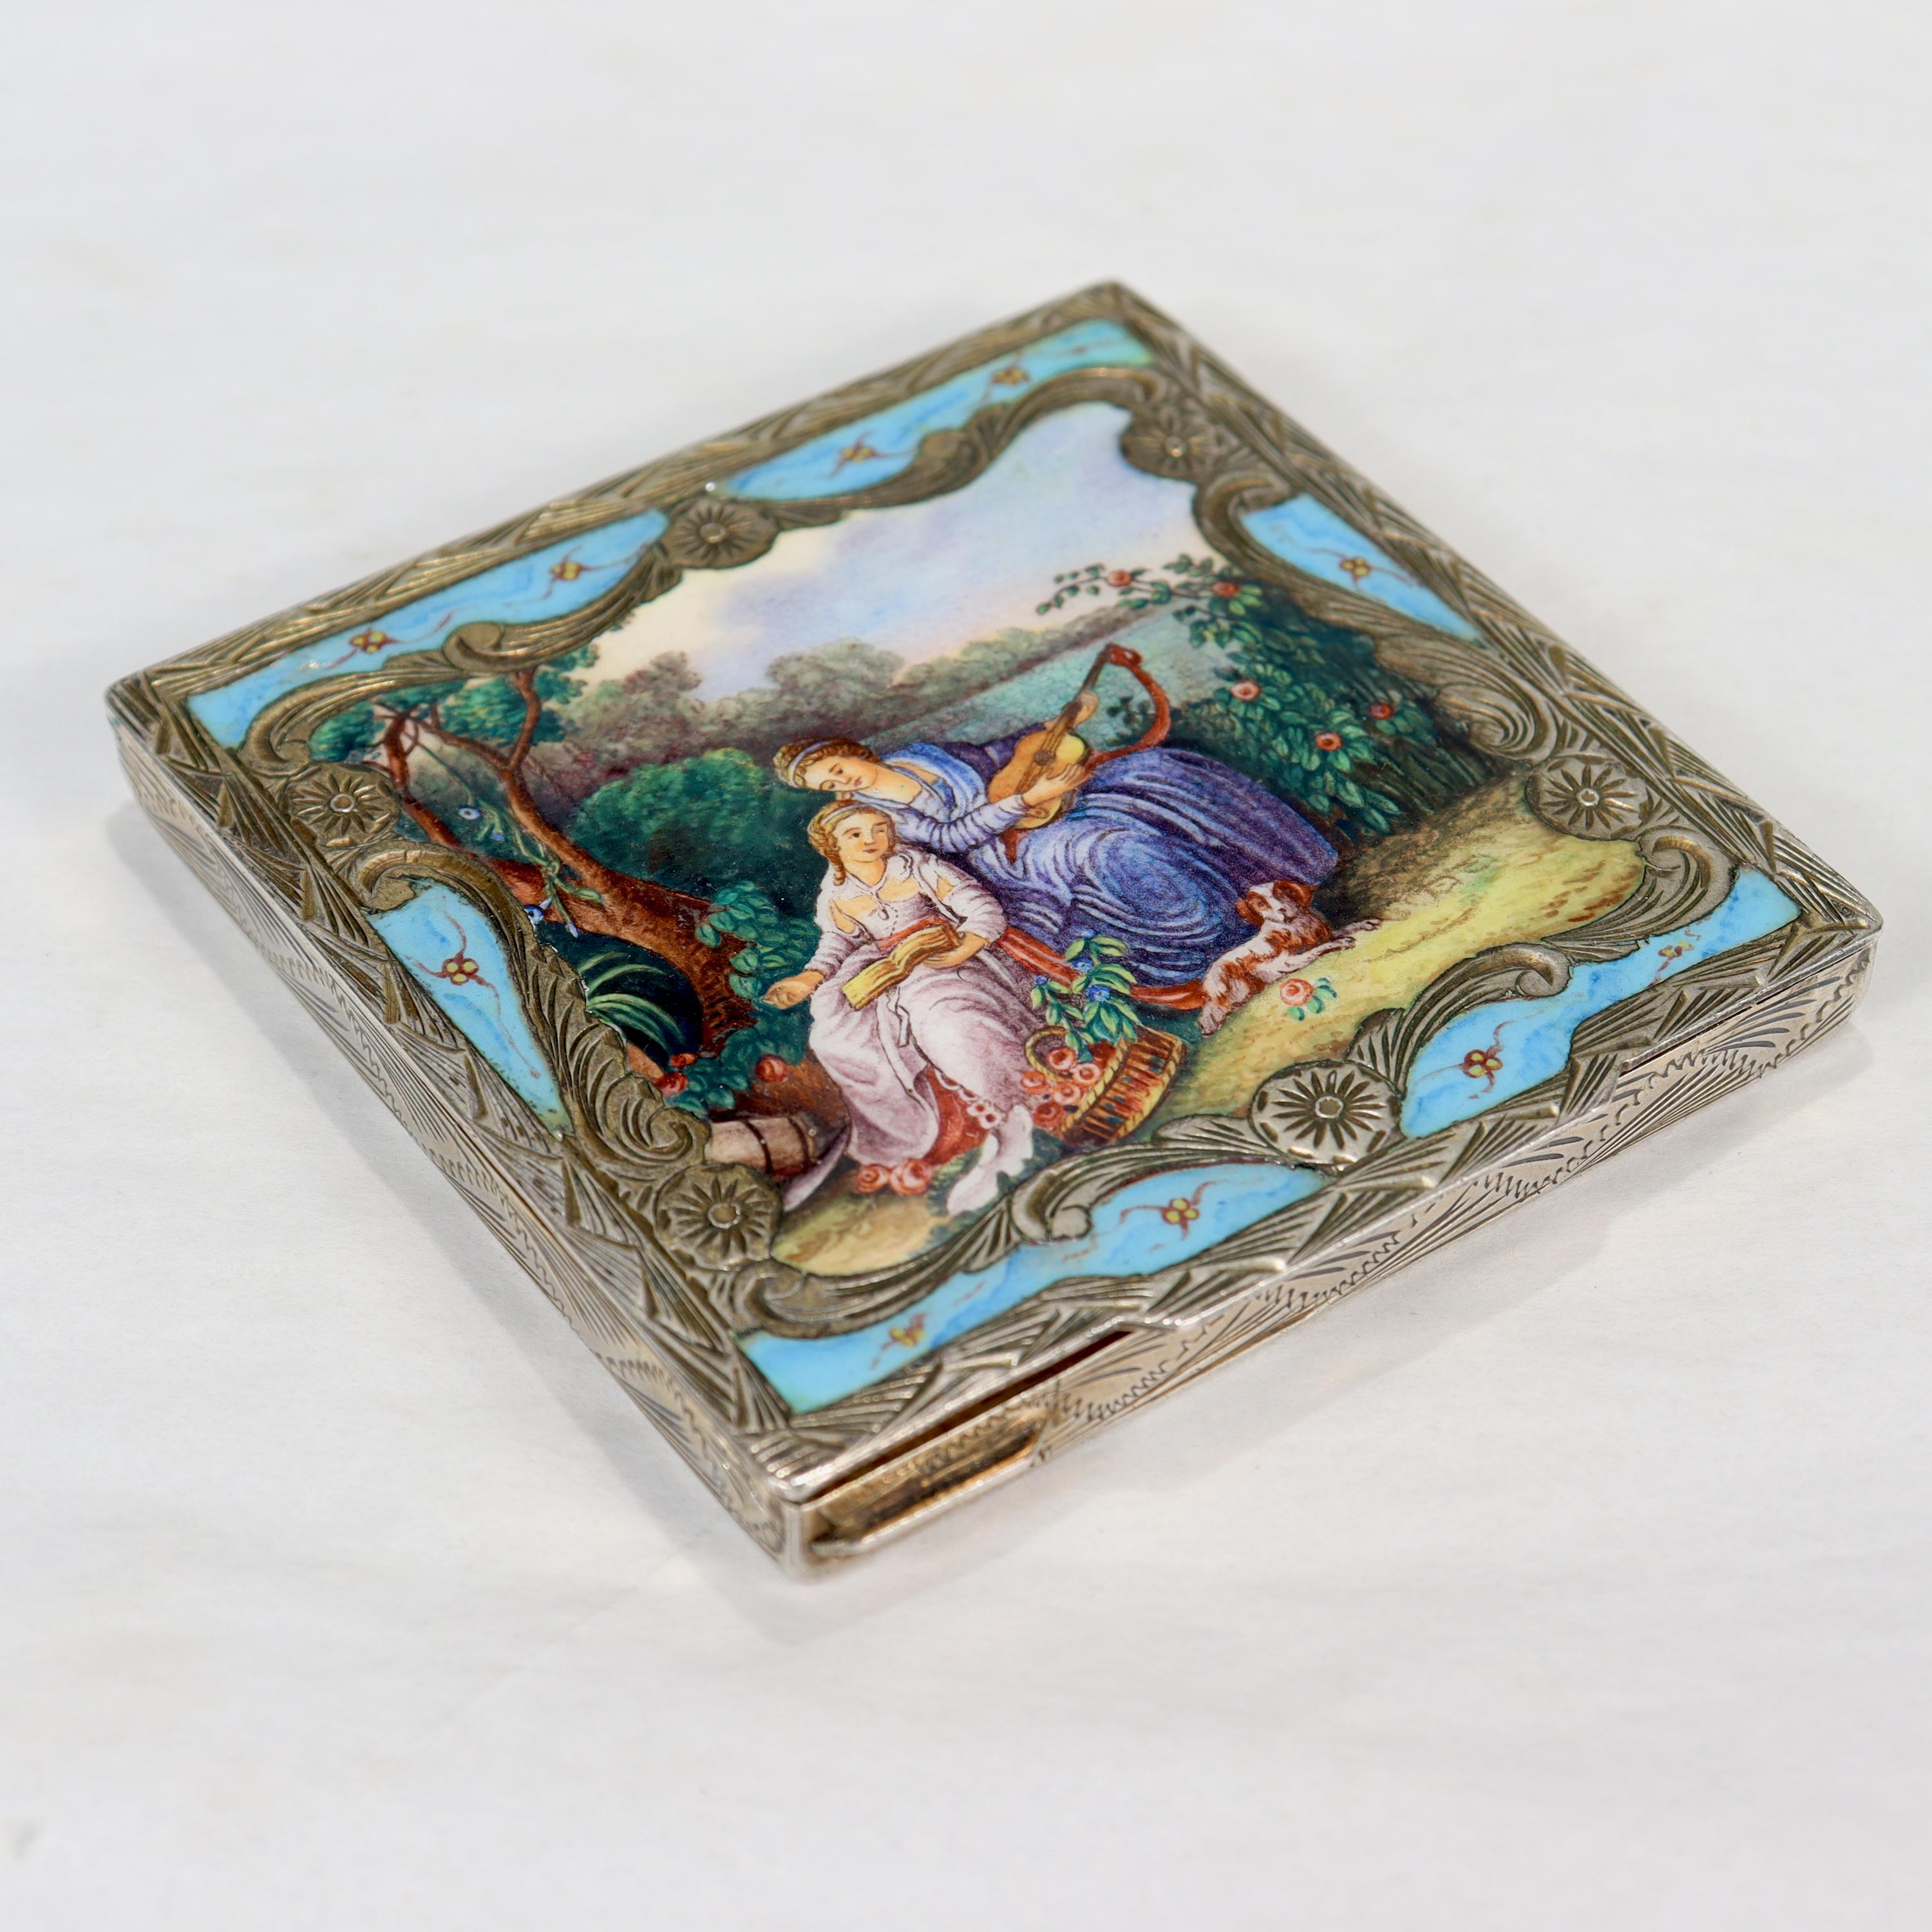 Renaissance Revival Old or Antique Italian Silver & Enamel Compact with its Original Box For Sale